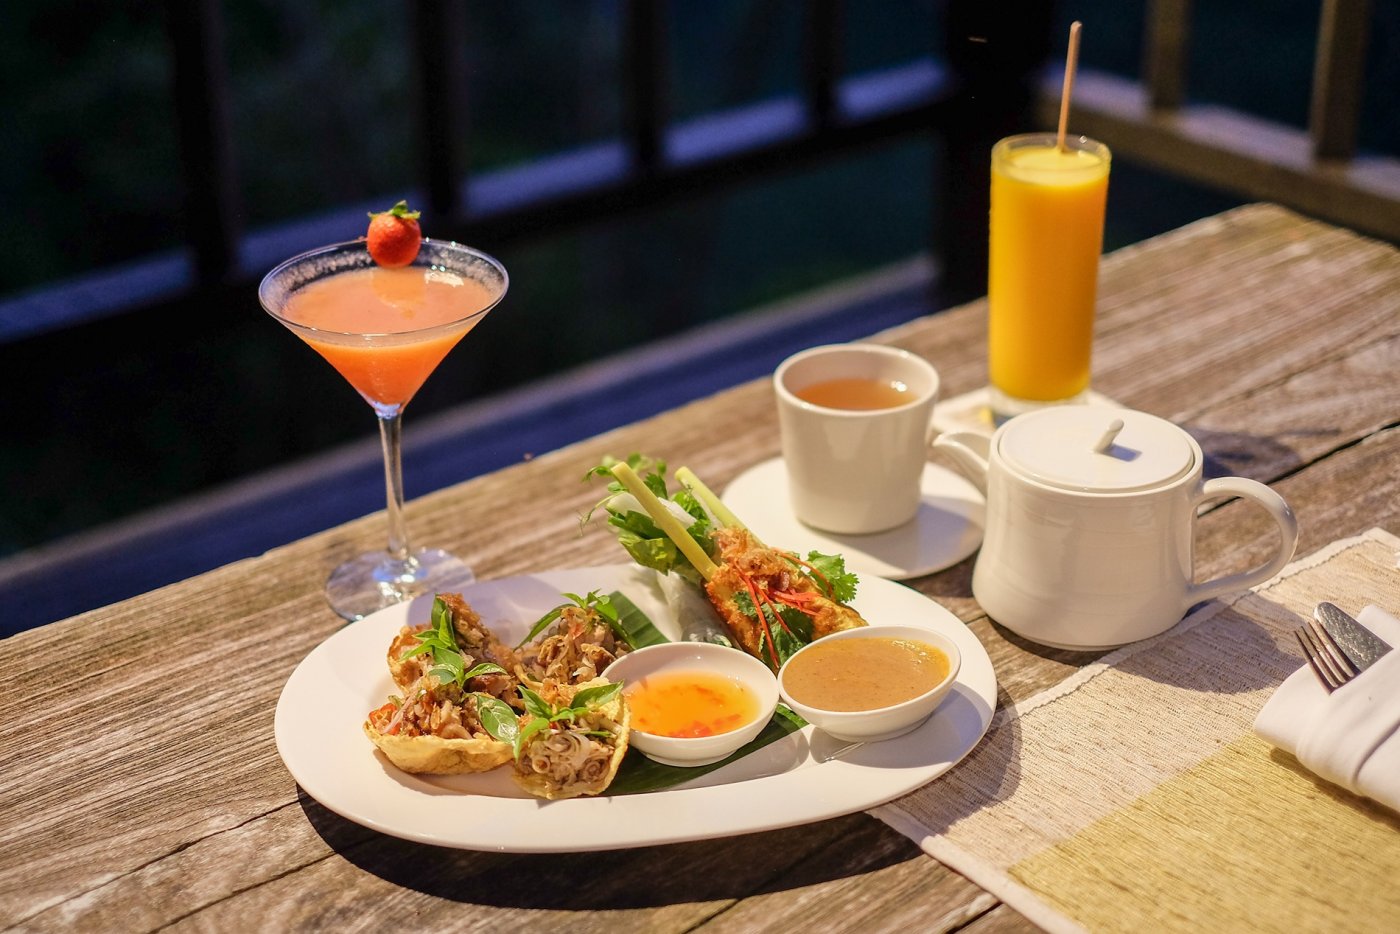 Sunset Tea Experience with healthy light bites and refreshing drinks